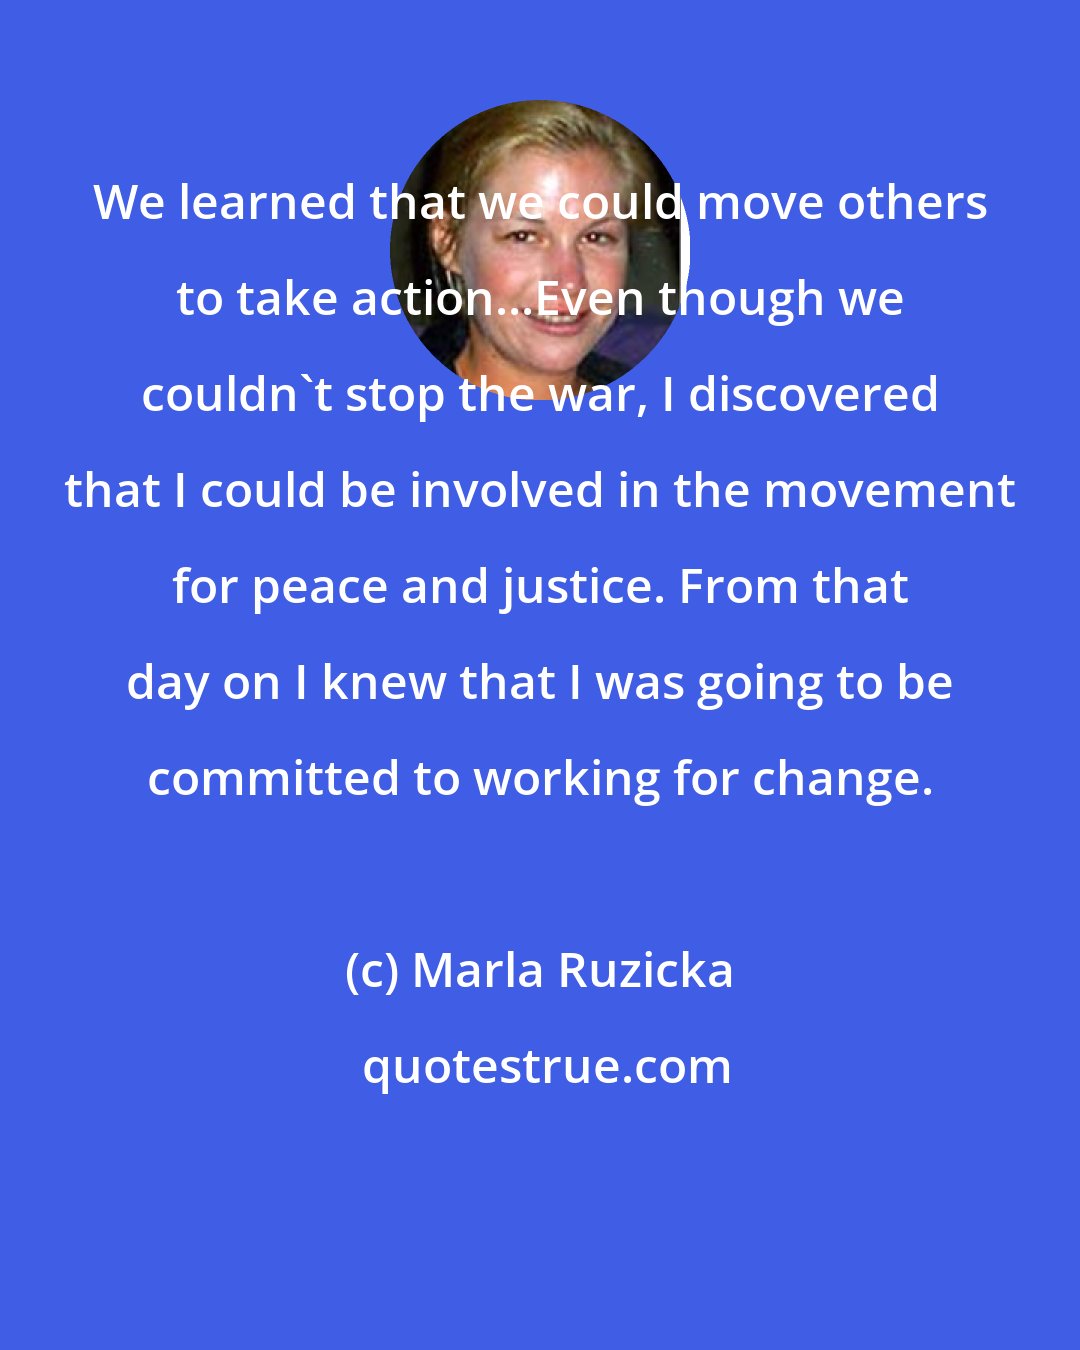 Marla Ruzicka: We learned that we could move others to take action...Even though we couldn't stop the war, I discovered that I could be involved in the movement for peace and justice. From that day on I knew that I was going to be committed to working for change.